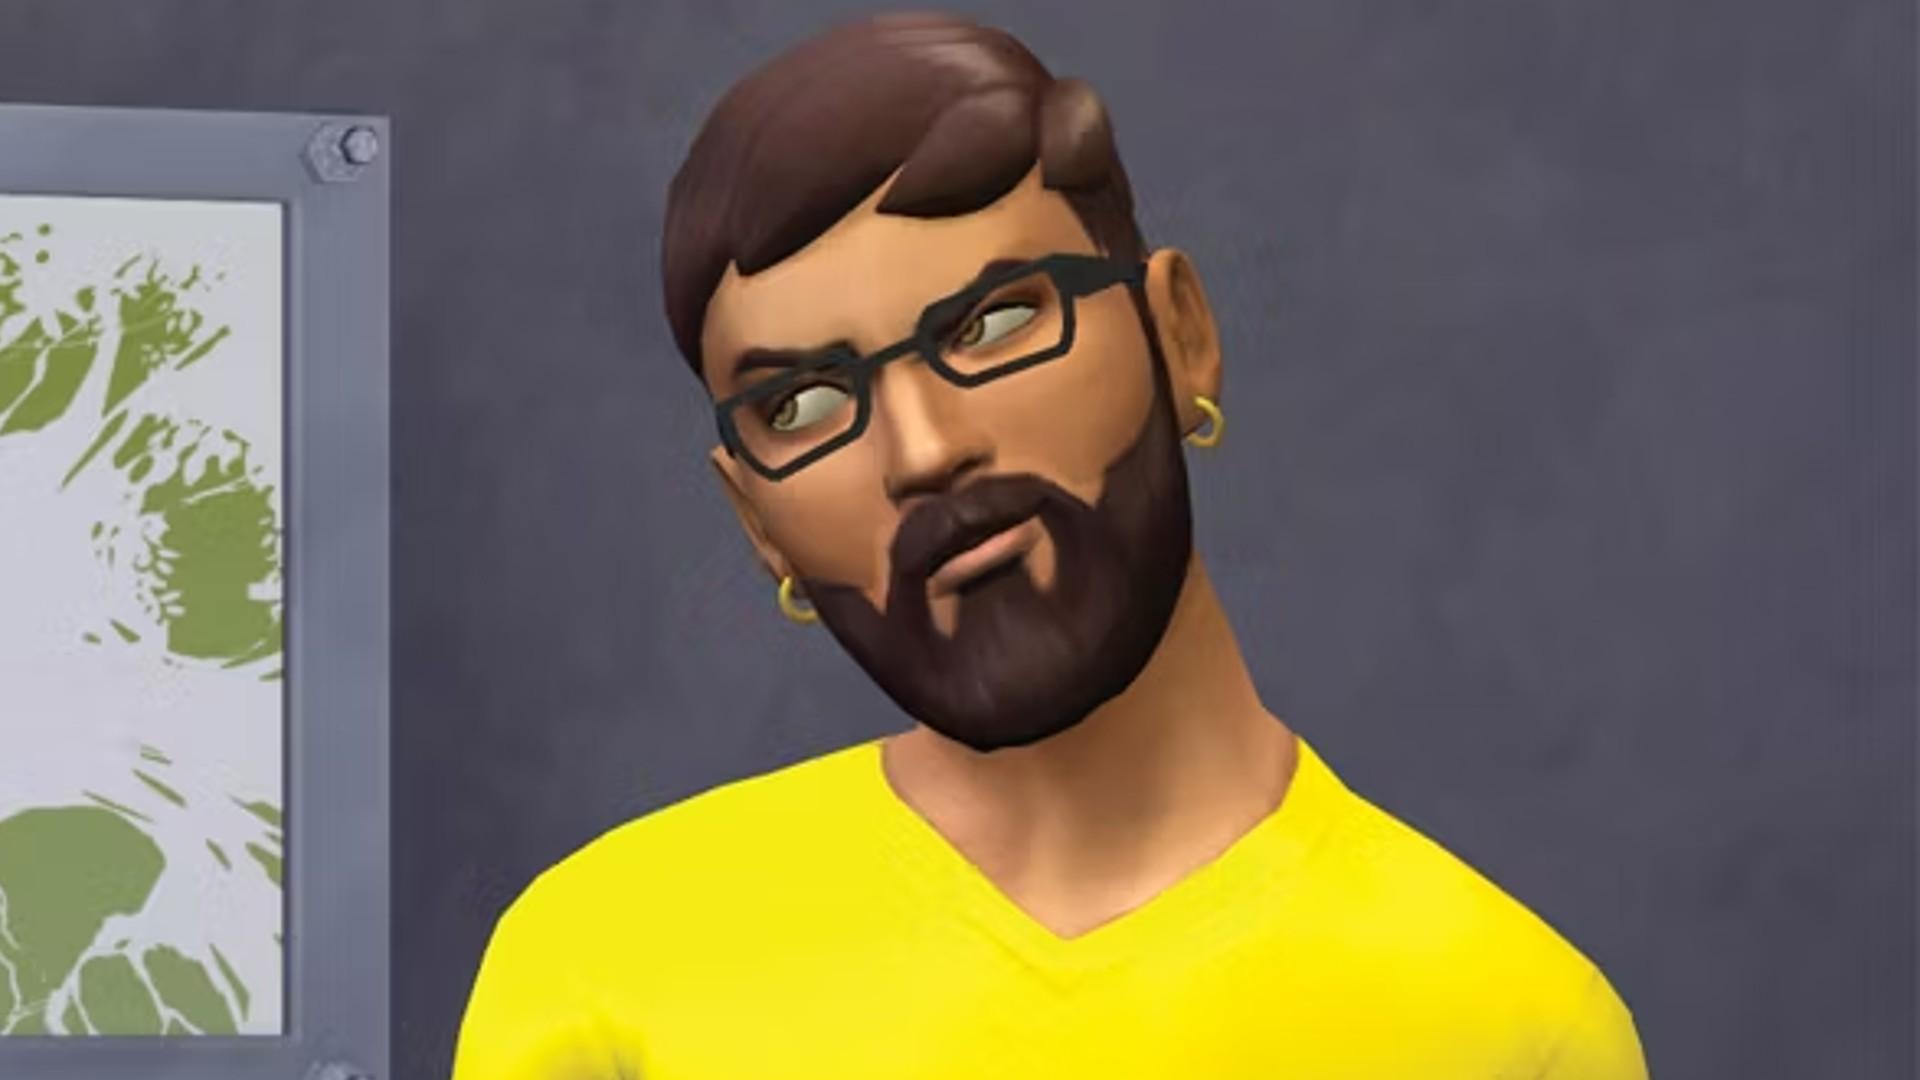 Your Sims 4 personas are bad people, but it isn't their fault